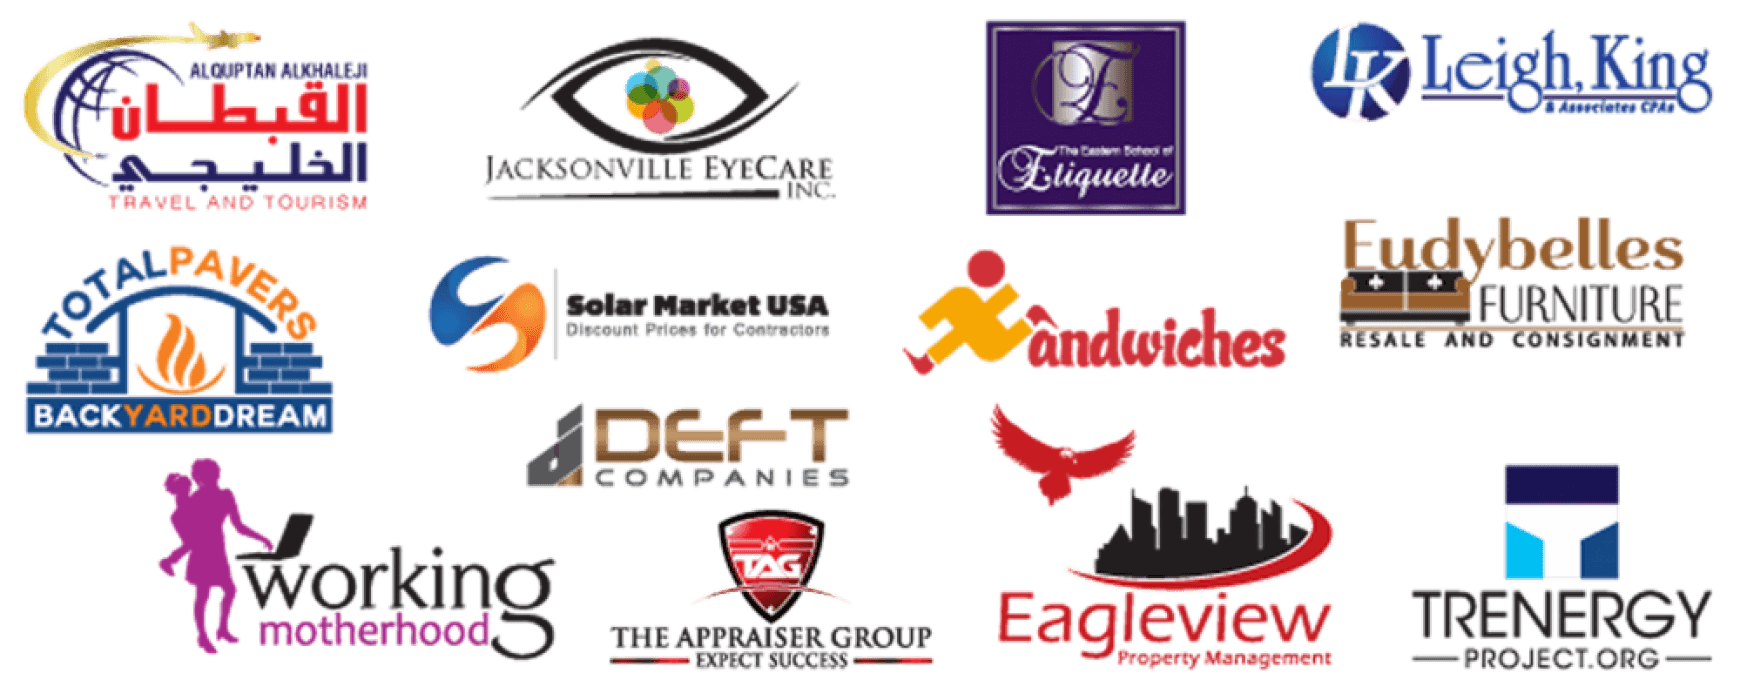 Different Types of Companies Logo - Types of Logos | Crest Logo Designs - We Offer All Brand Designing ...